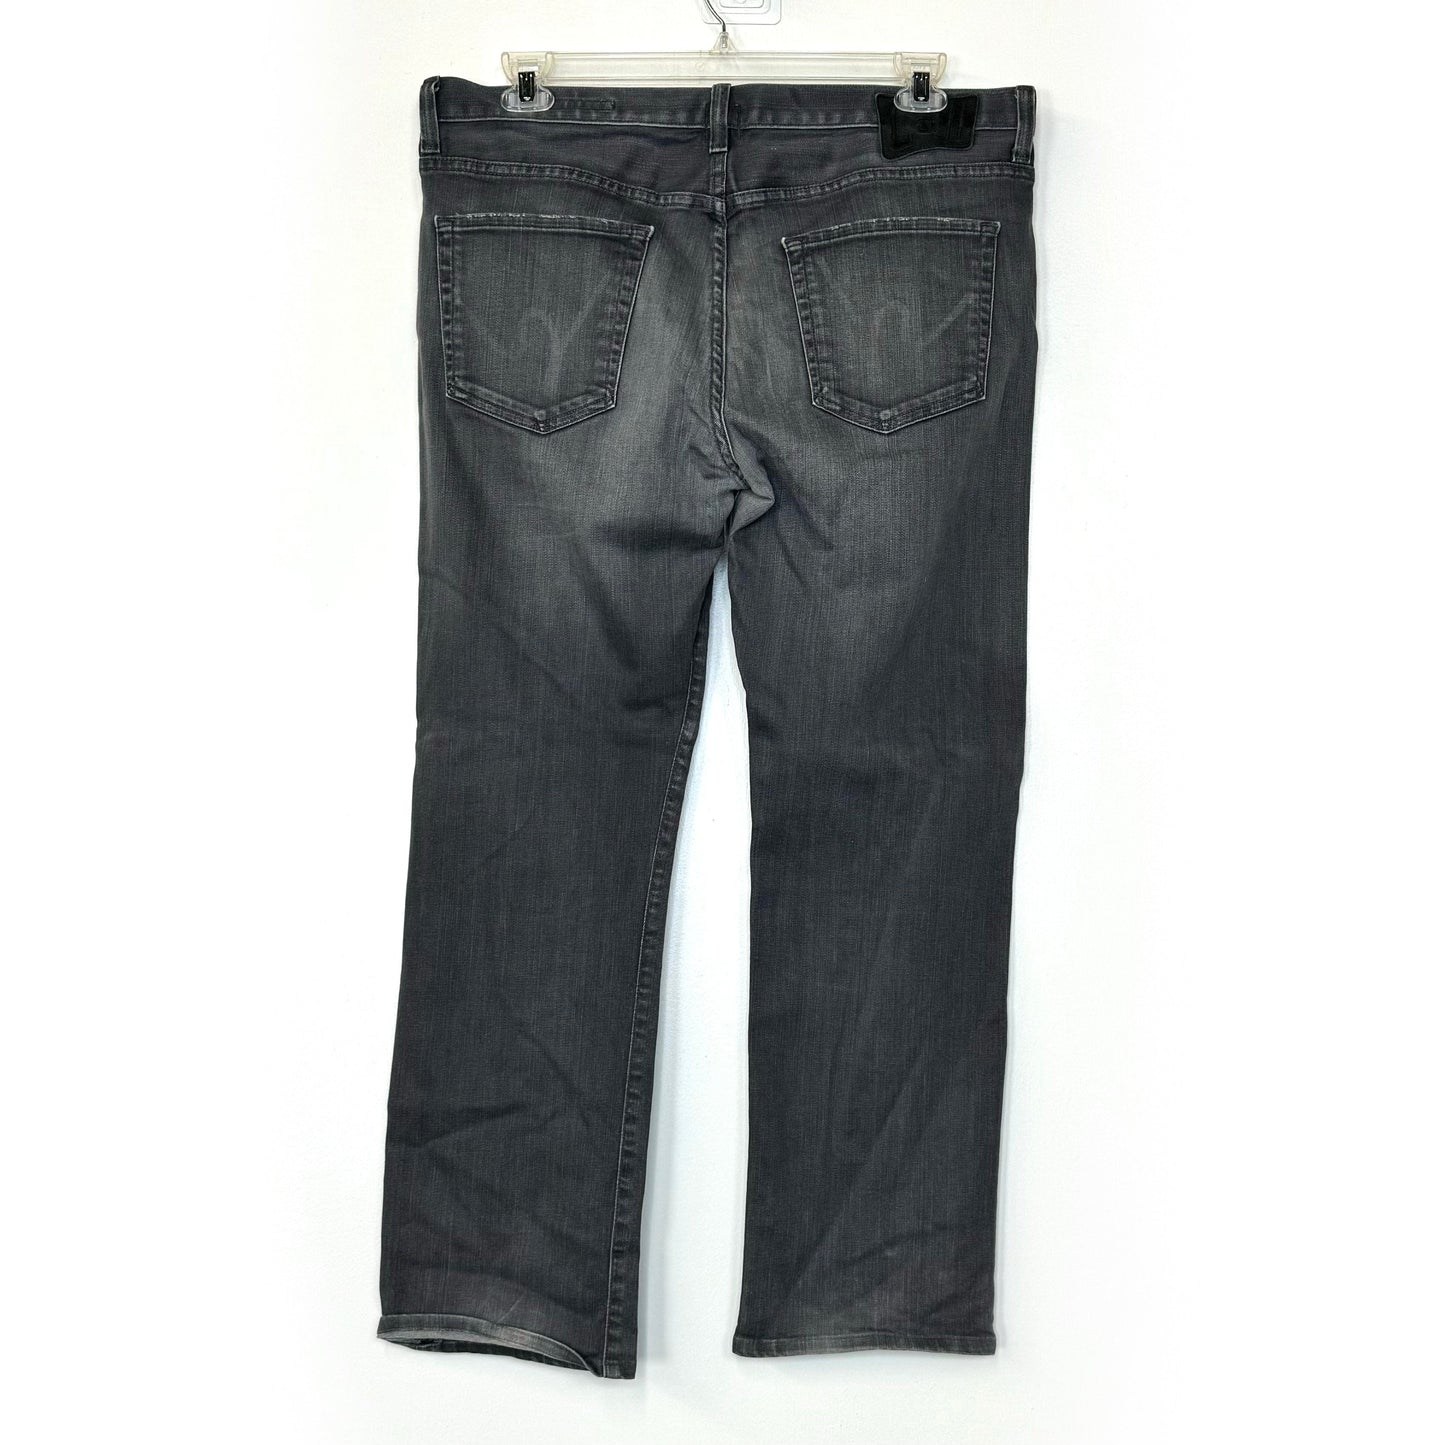 Citizens of Humanity | ‘Sid’ Straight Perform Denim Jeans | Color: Gray | Size: 36/29 | Pre-Owned